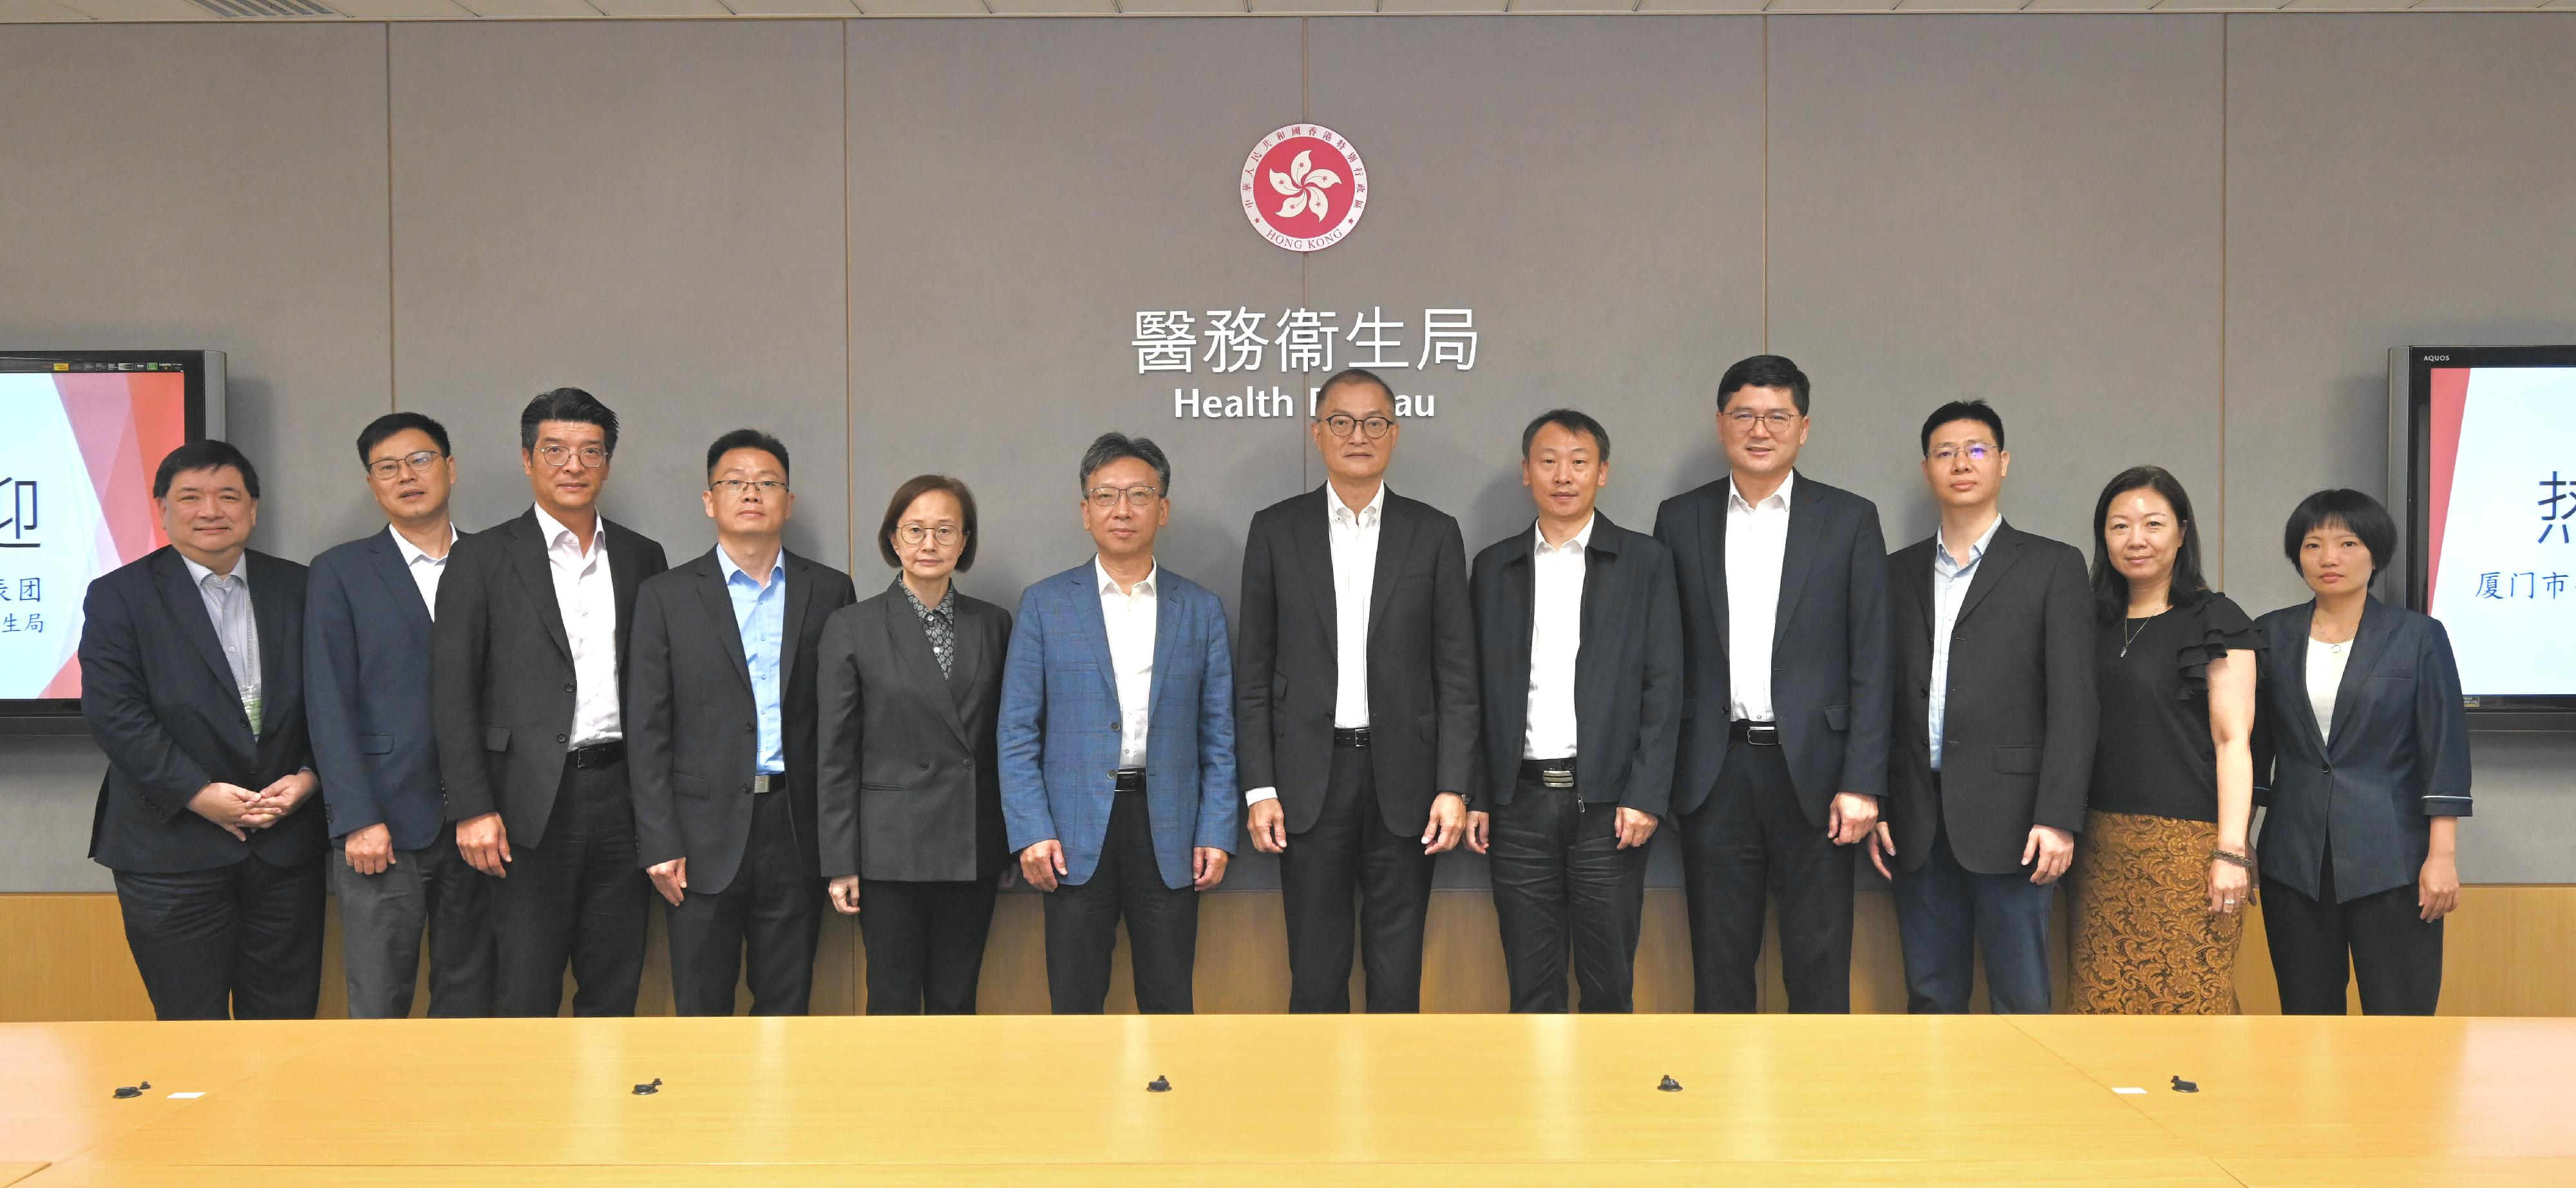 The Secretary for Health, Professor Lo Chung-mau, met with the Xiamen Municipal Public Health delegation led by the Deputy Director of the Standing Committee of Xiamen Municipal People's Congress, Mr Zheng Yuelin, today (October 18). Photo shows Professor Lo (sixth right); Mr Zheng (sixth left); the Acting Director of Health, Dr Amy Chiu (fifth left); the Commissioner for Primary Healthcare of the Health Bureau, Dr Pang Fei-chau (third left); the Chief Executive of the Hospital Authority, Dr Tony Ko (fourth right), and other attendees of the meeting.